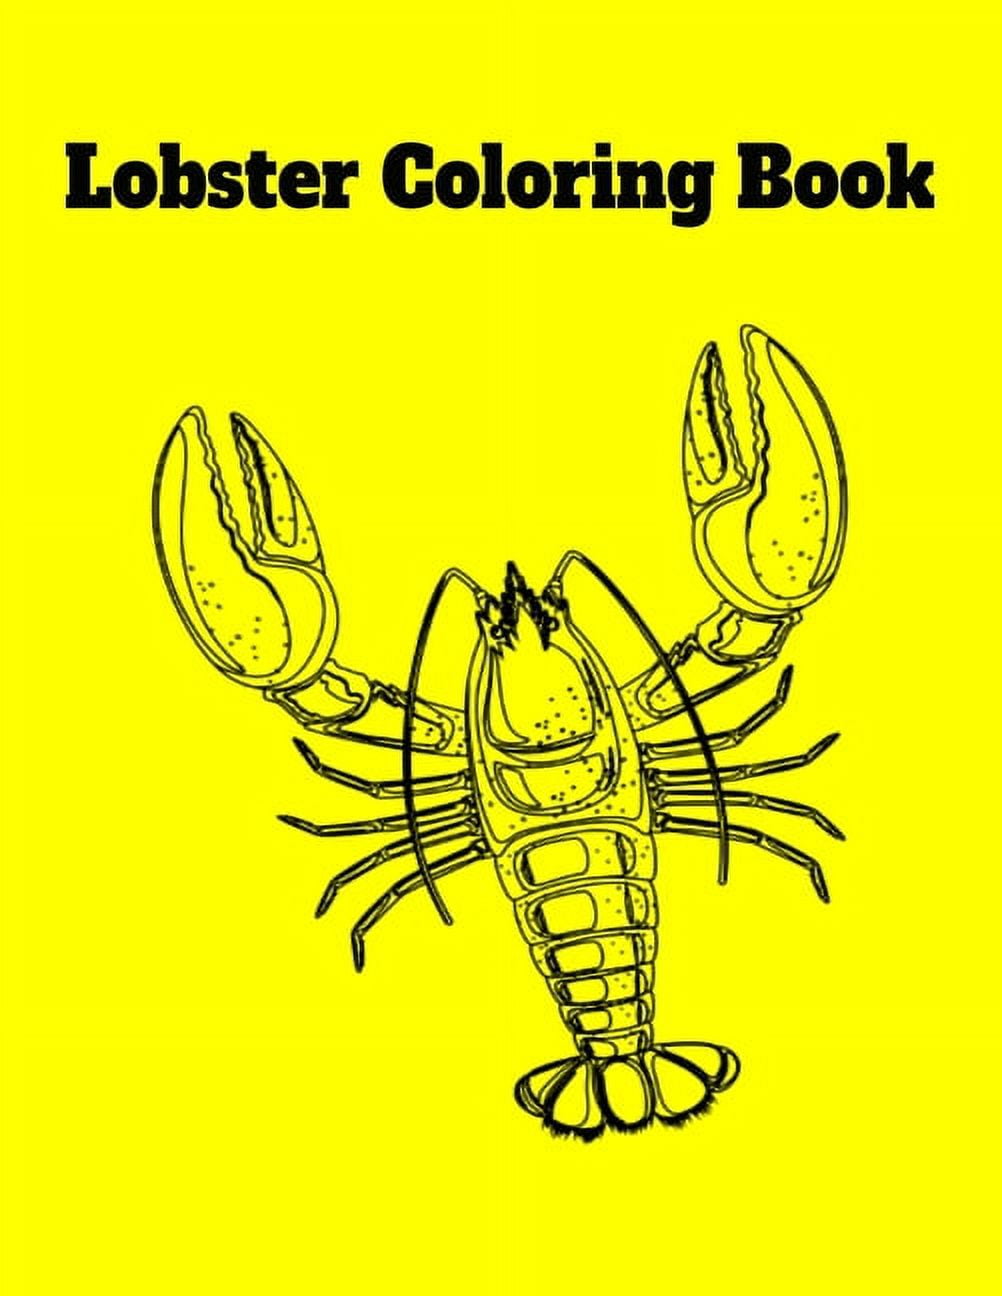 Lobster coloring book